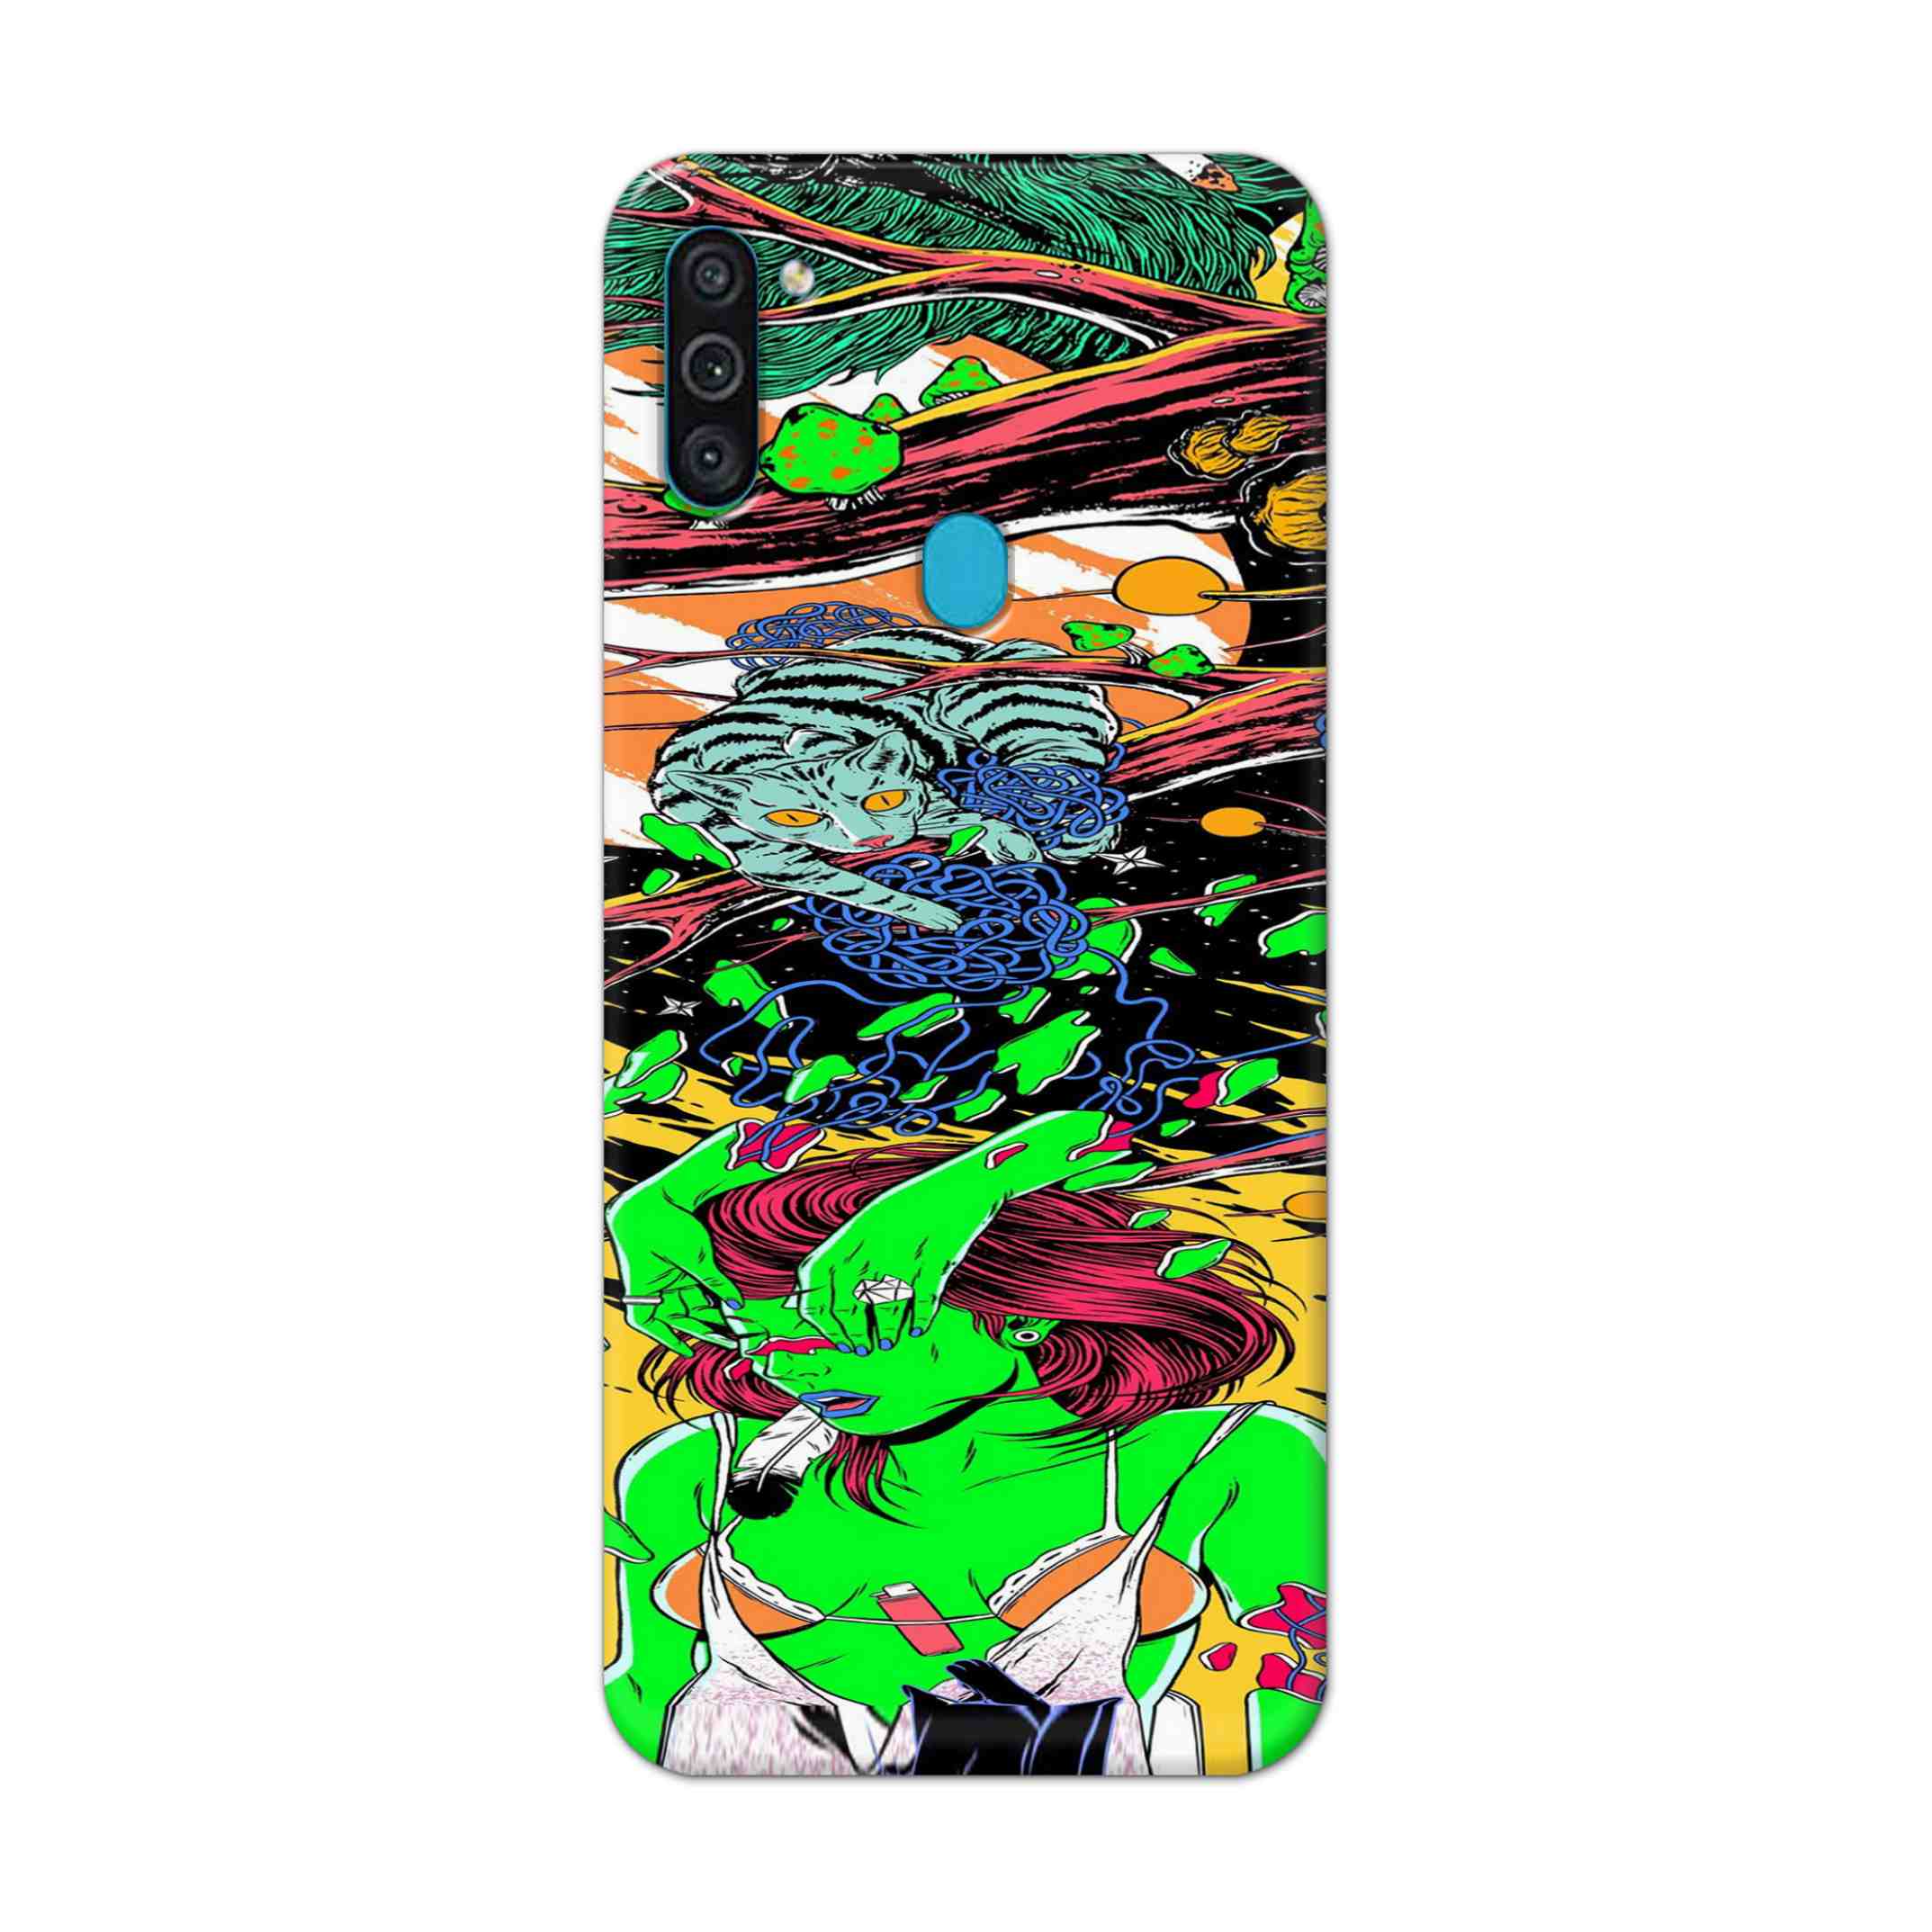 Buy Green Girl Art Hard Back Mobile Phone Case Cover For Samsung Galaxy M11 Online